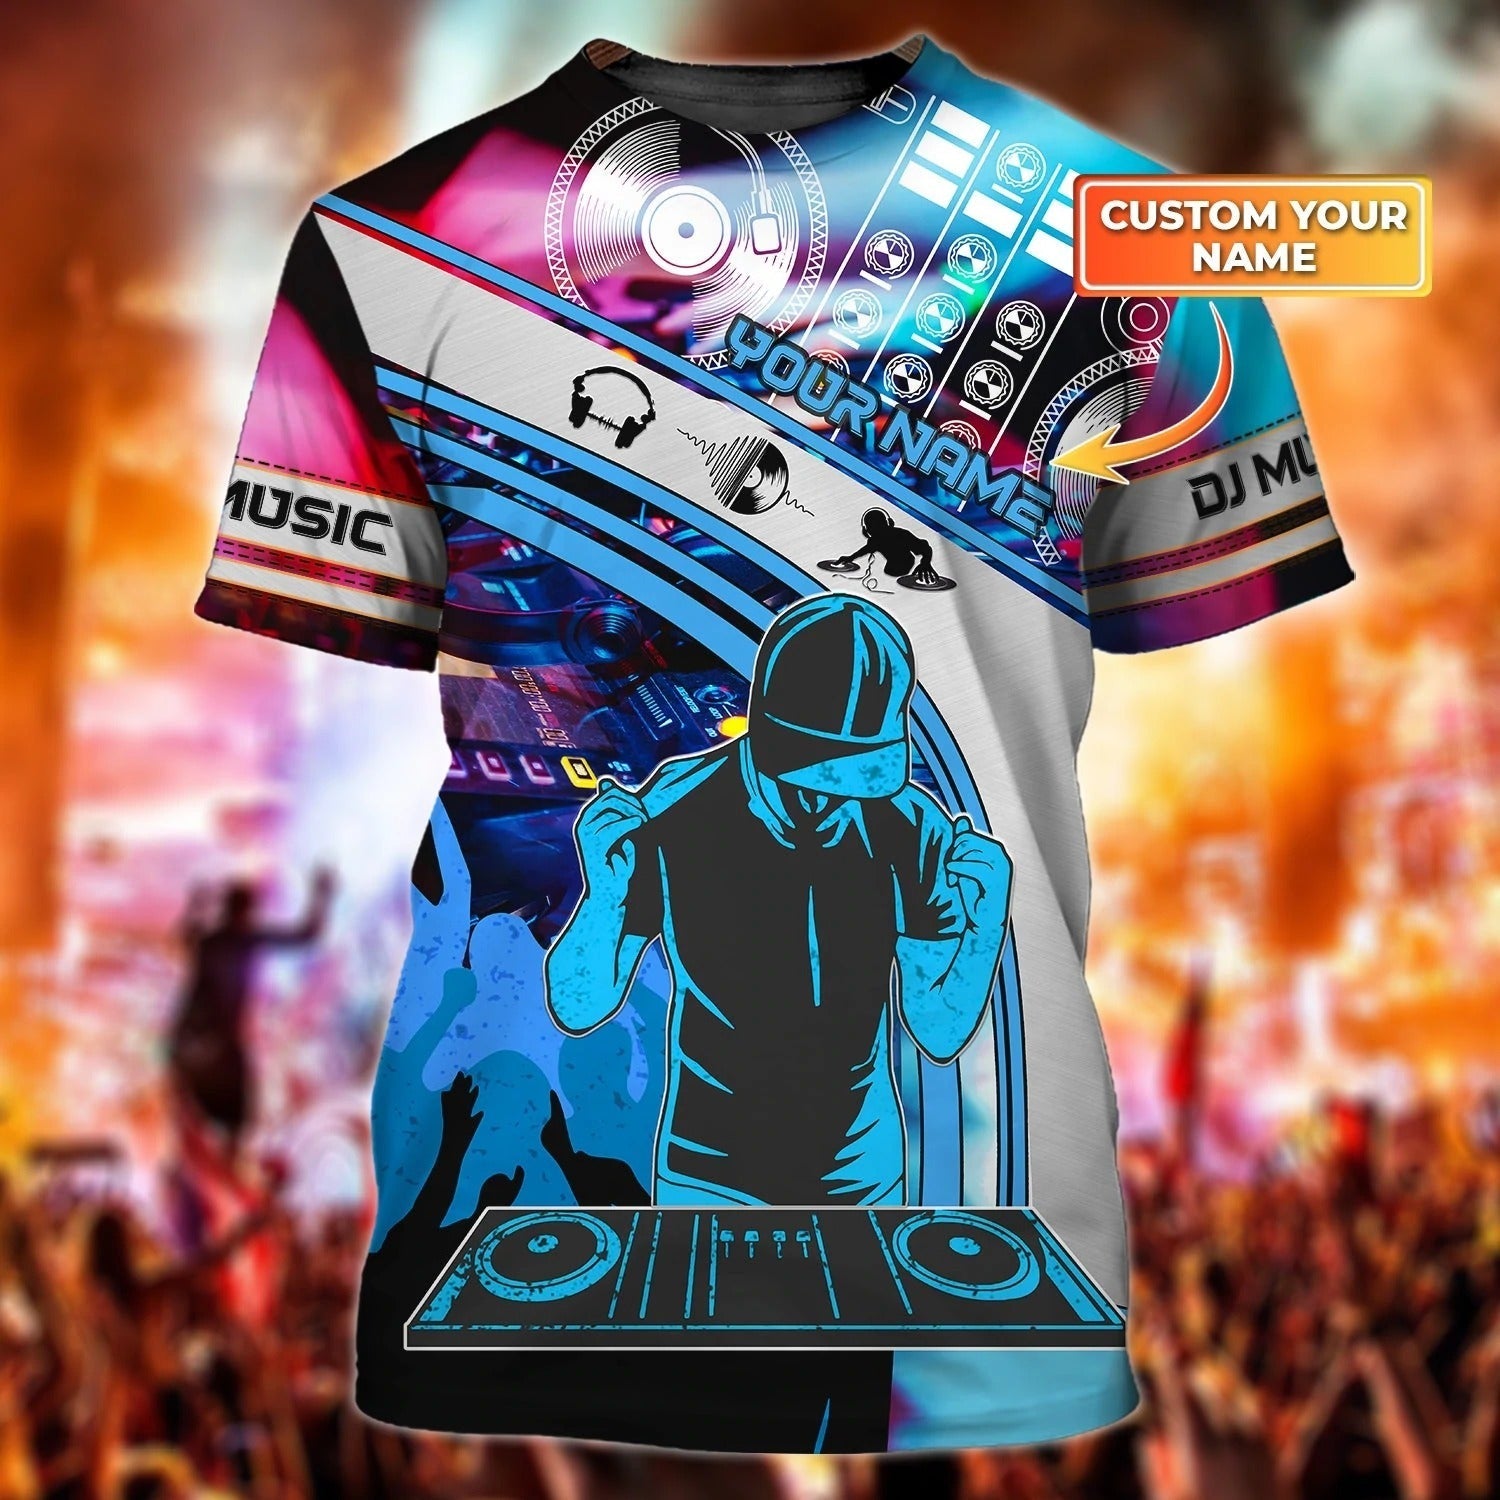 Personalized 3D Full Print T Shirt For Dj And Musican/ This Dj Is Taking Requests Shirts/ Dj Shirt